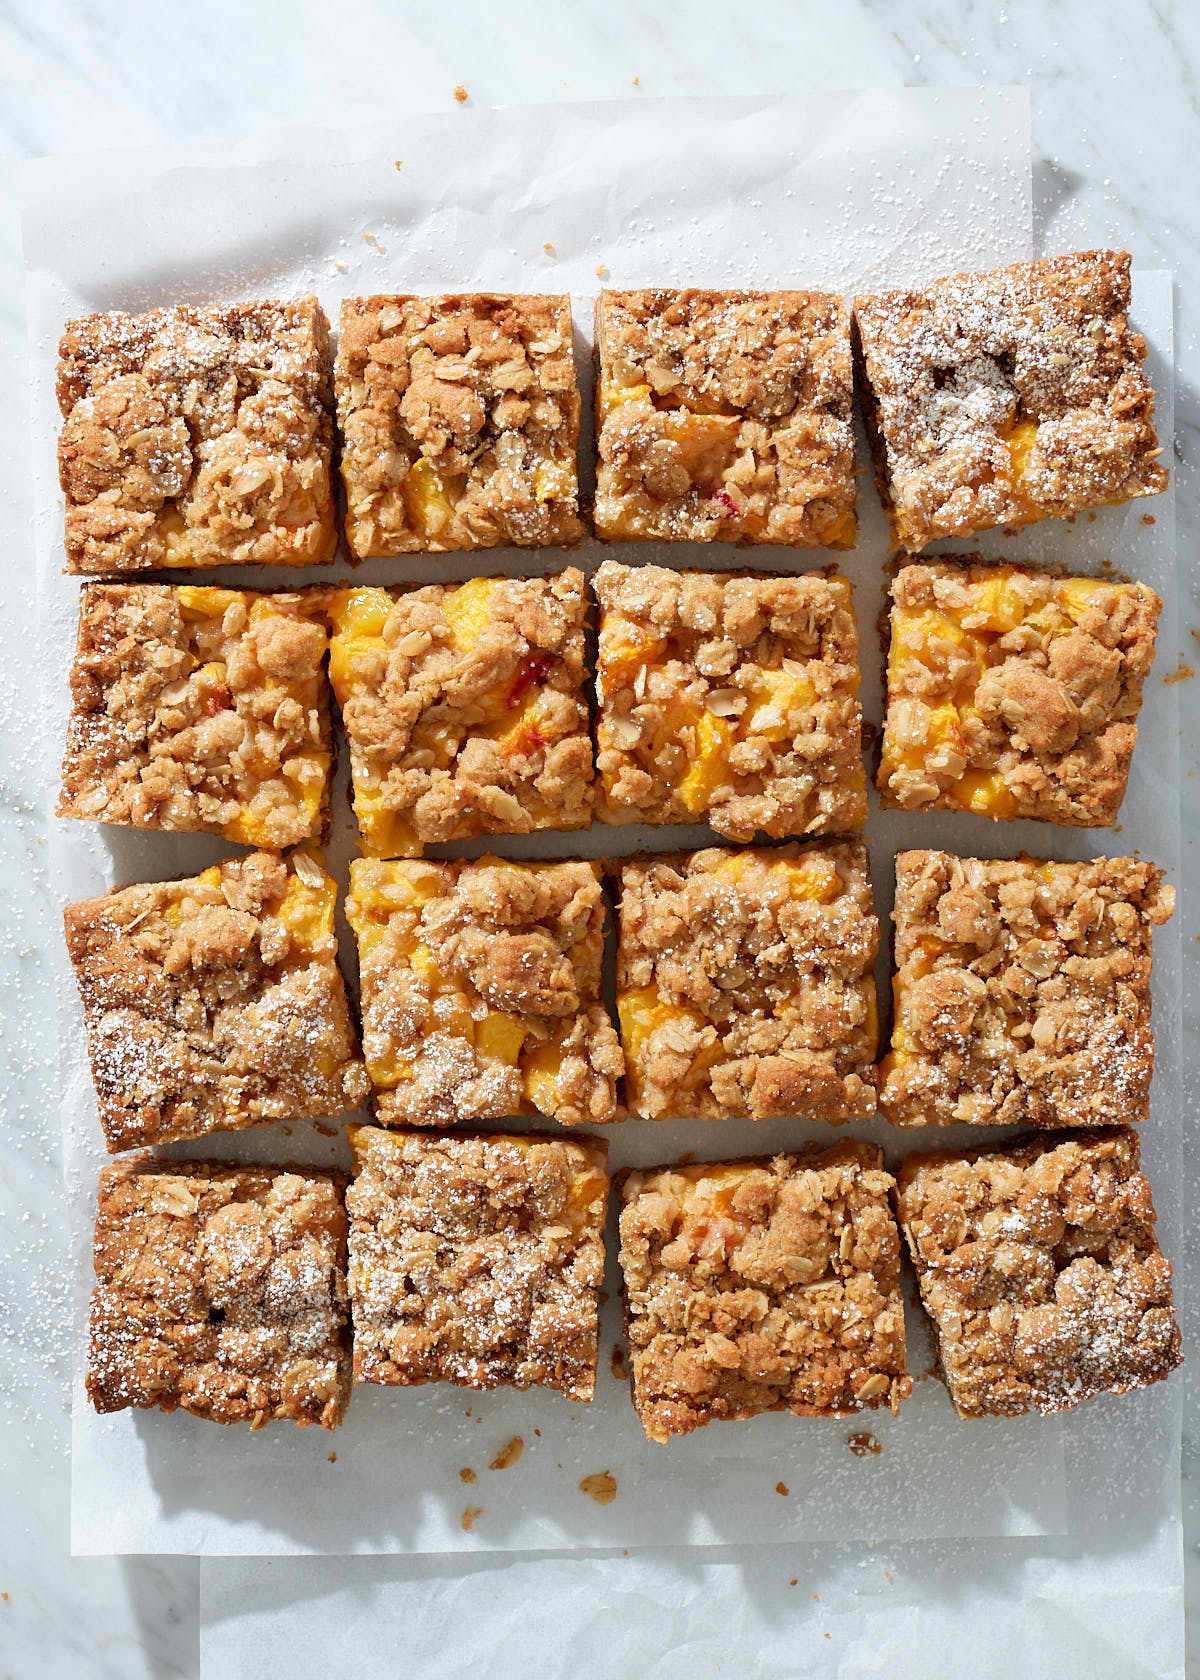 Peach bars sliced into equal sqaures on white parchment paper